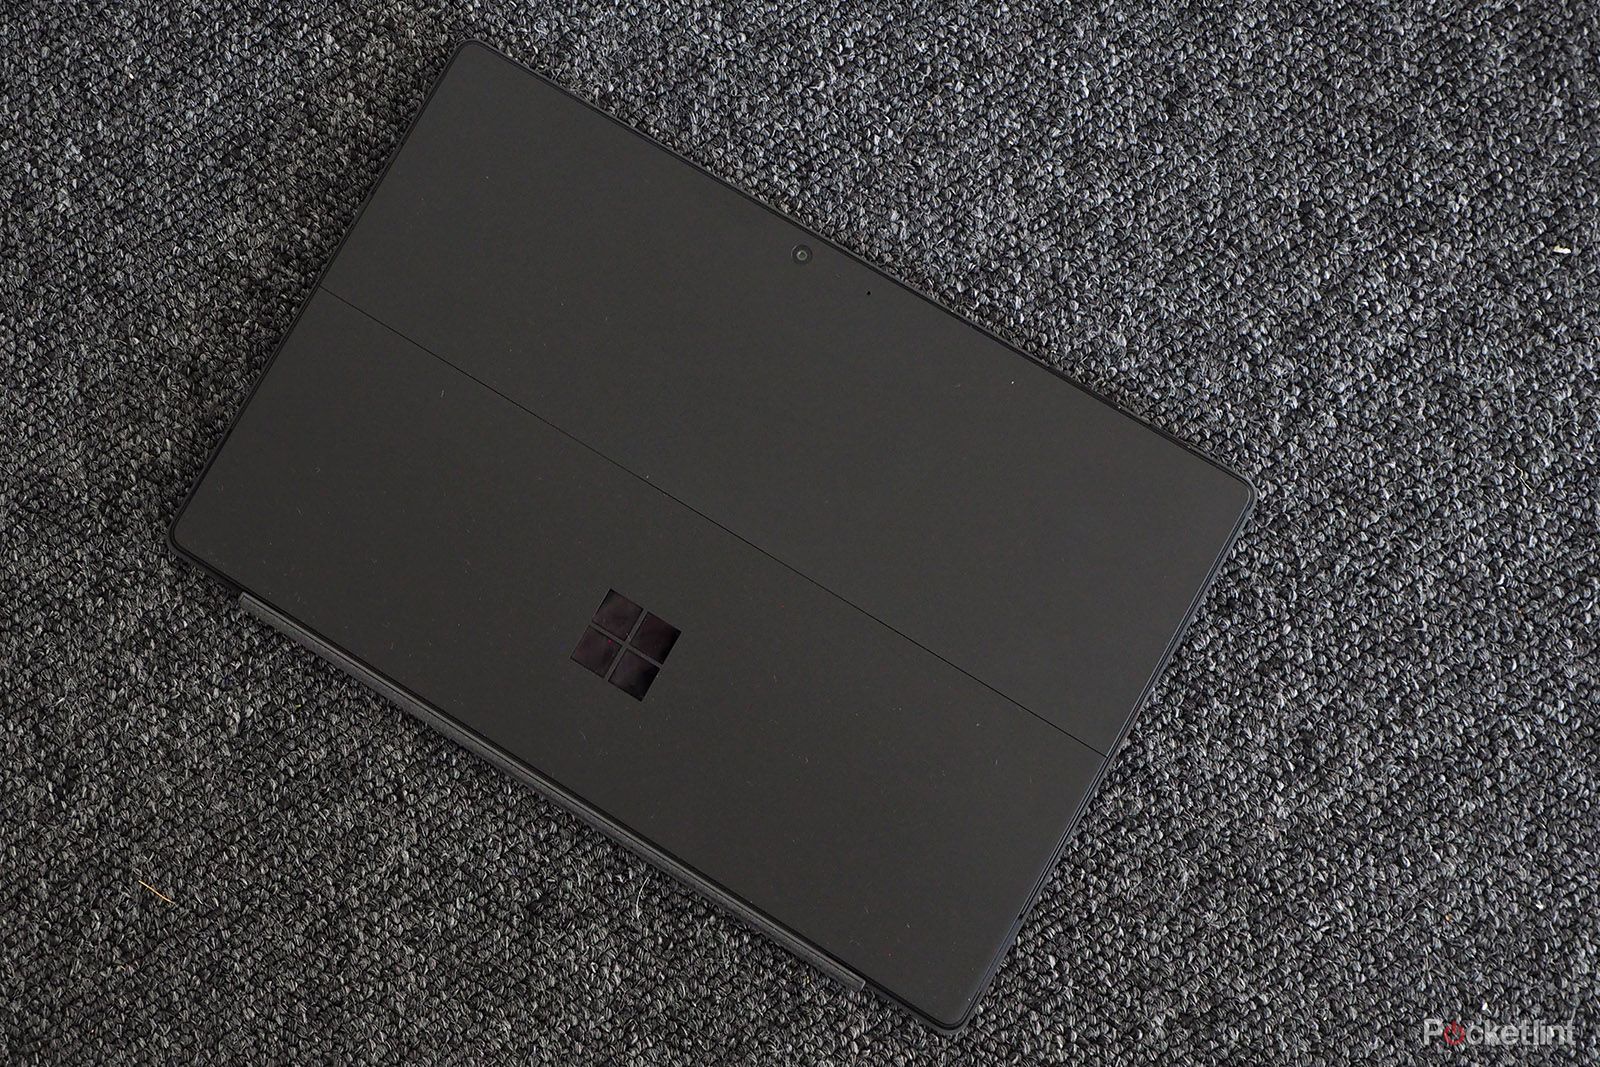 Microsoft is working on a redesigned Surface Pro new patent suggests image 1